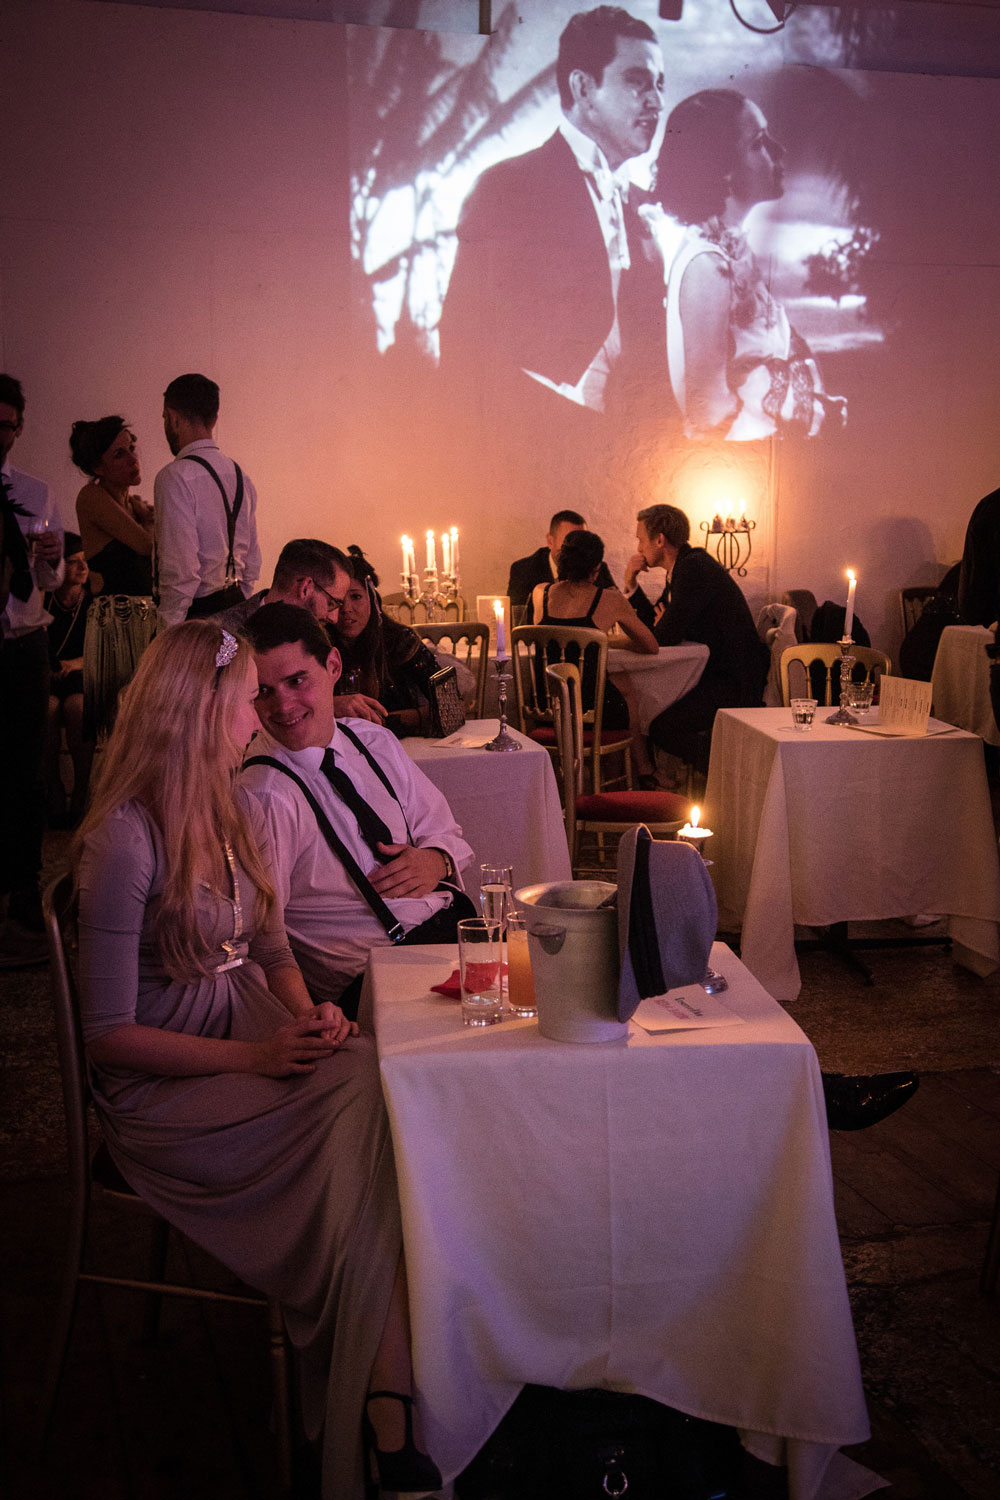 Couple at a dinner table with movie projection in the background